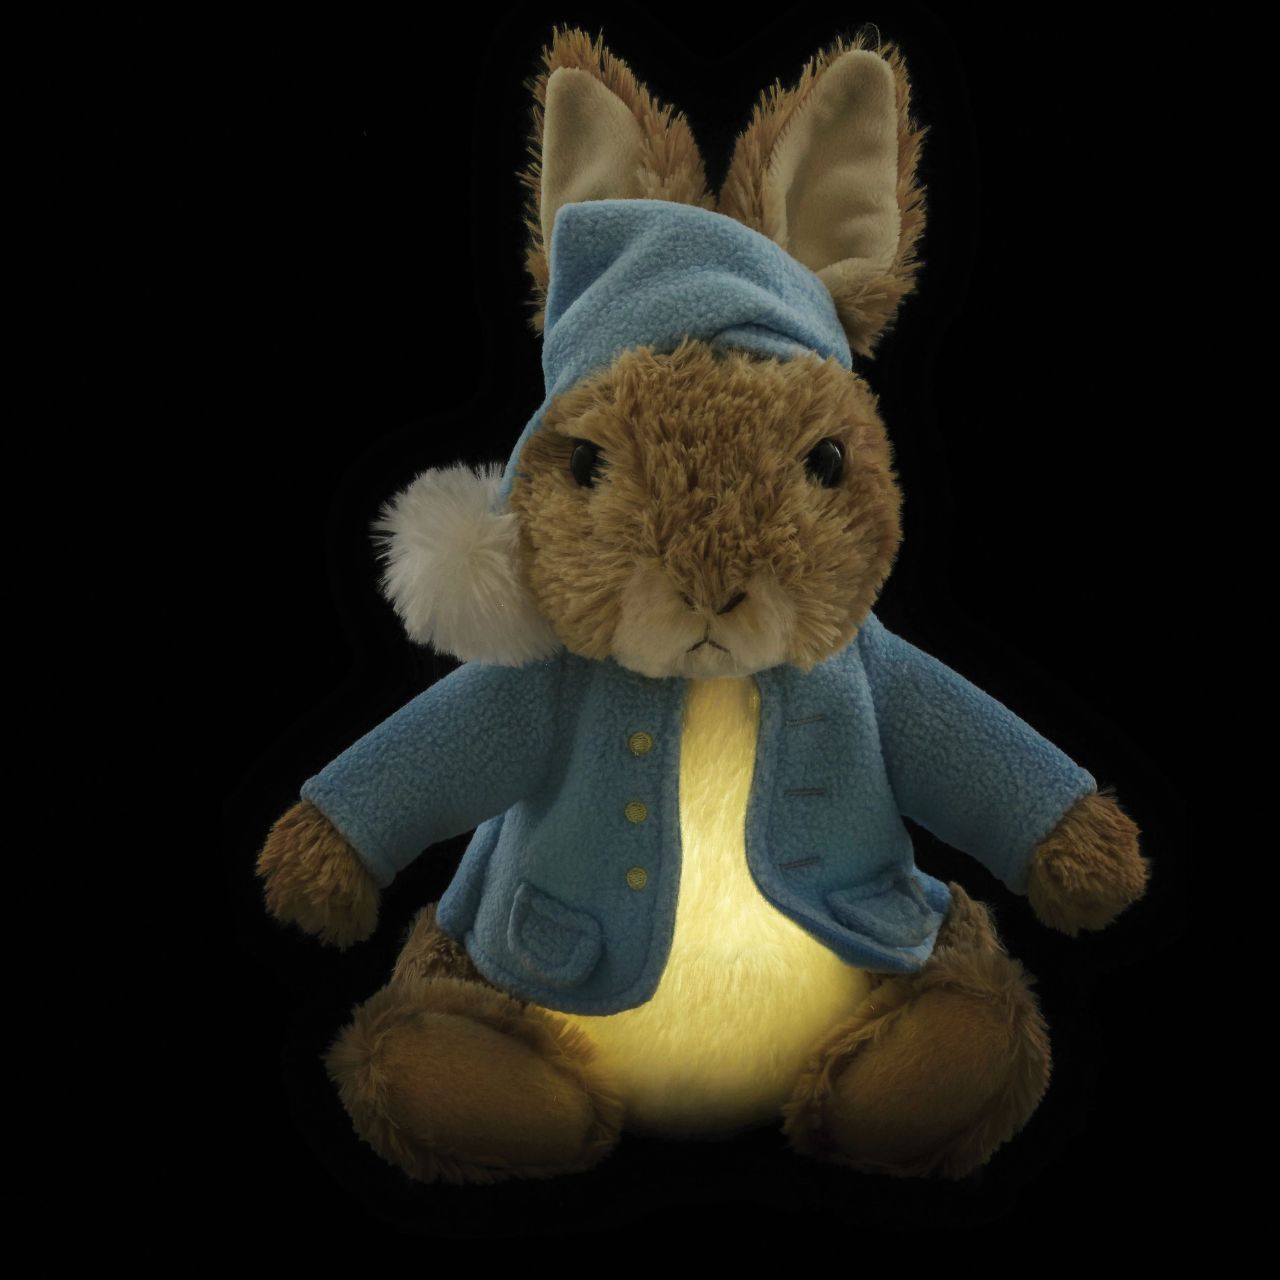 Beatrix Potter Bedtime Peter Rabbit  Bedtime Peter is the perfect gift for parents, young children and lovers of Peter Rabbit. By pressing Peter's foot, his stomach will softly glow with gentle, warm light that slowly pulsates to aid relaxation. He also plays "Brahms' Lullaby" to create the ideal environment for sleep.